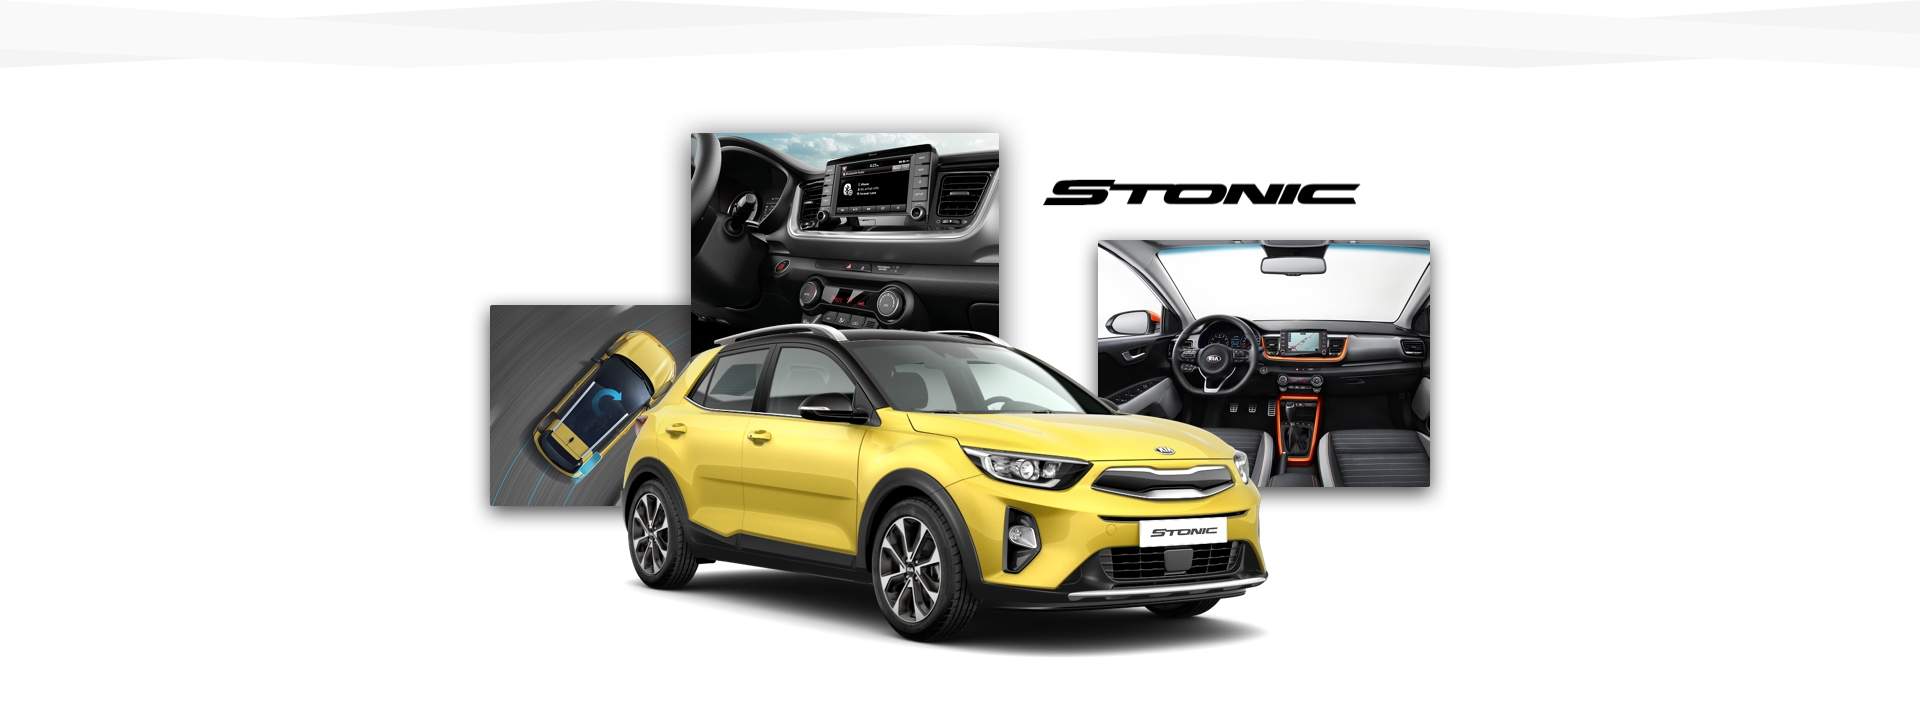 Side view of Kia Stonic with shots of stability control system, instrument cluster and cabin